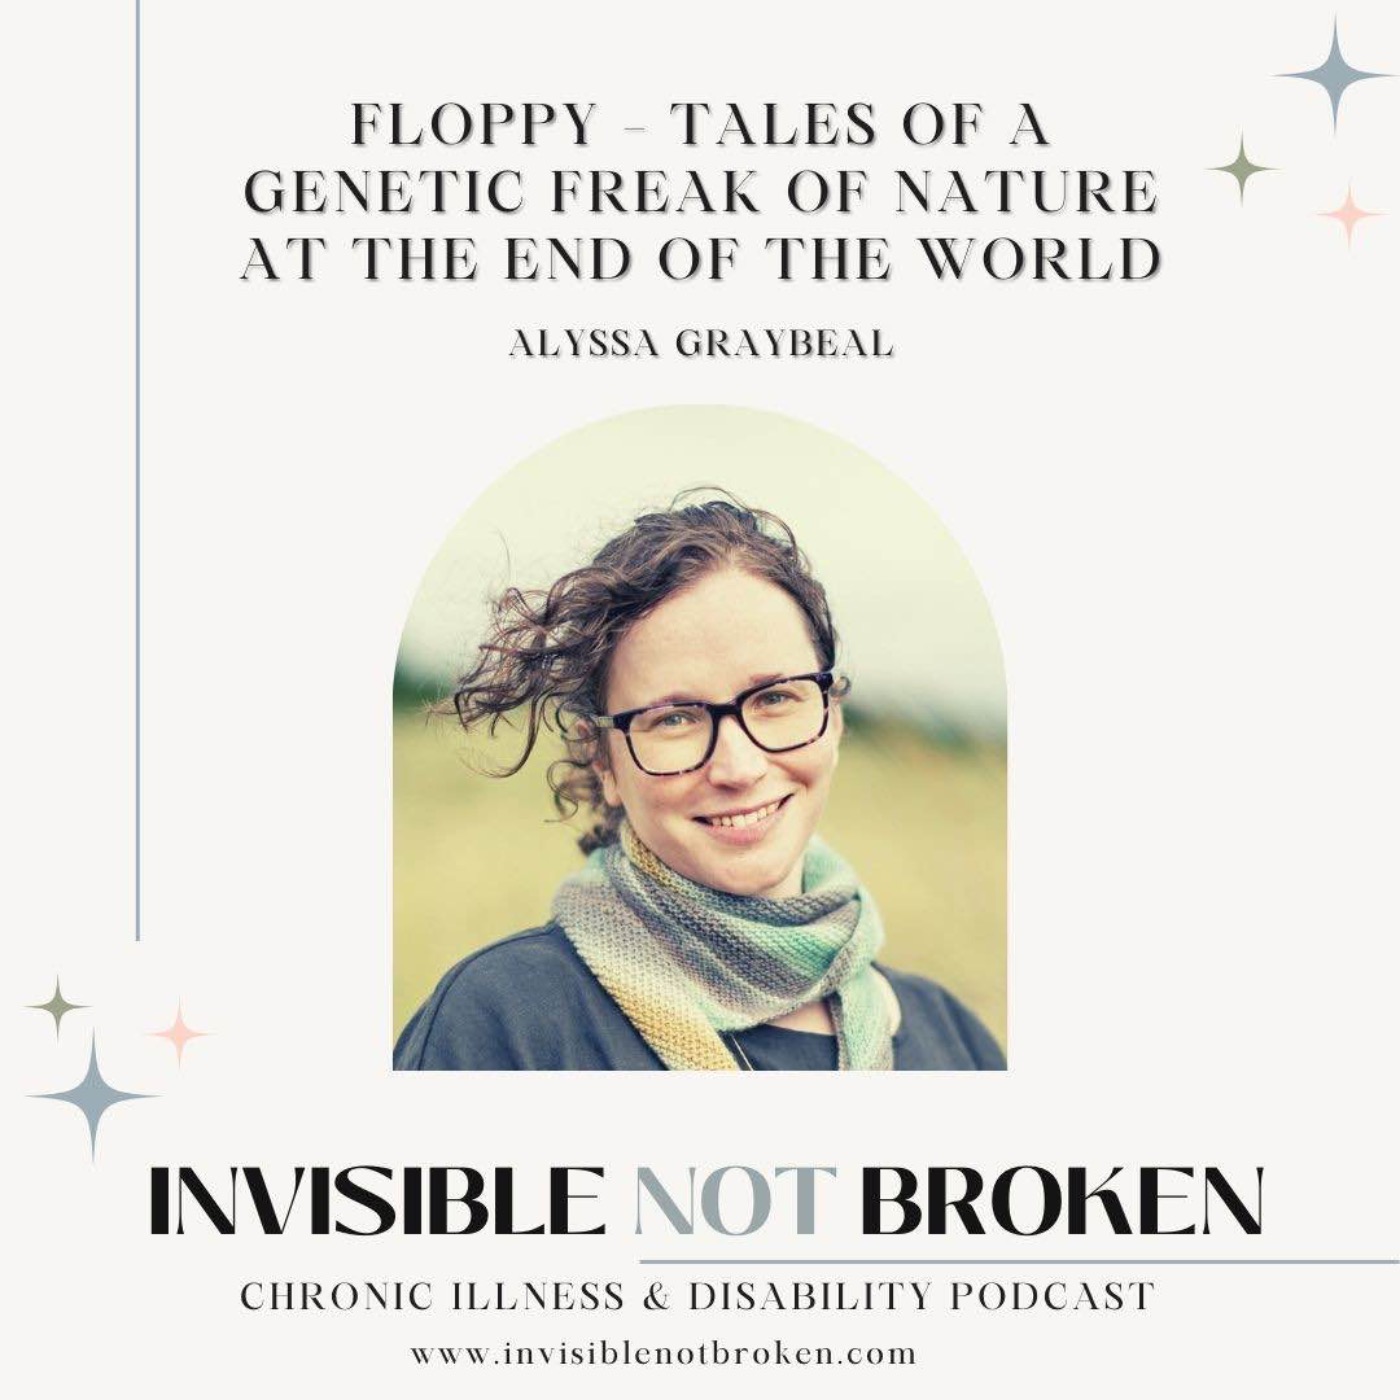 EDS Author of Floppy - Tales of a Genetic Freak of Nature at the End of the World: Alyssa Graybeal